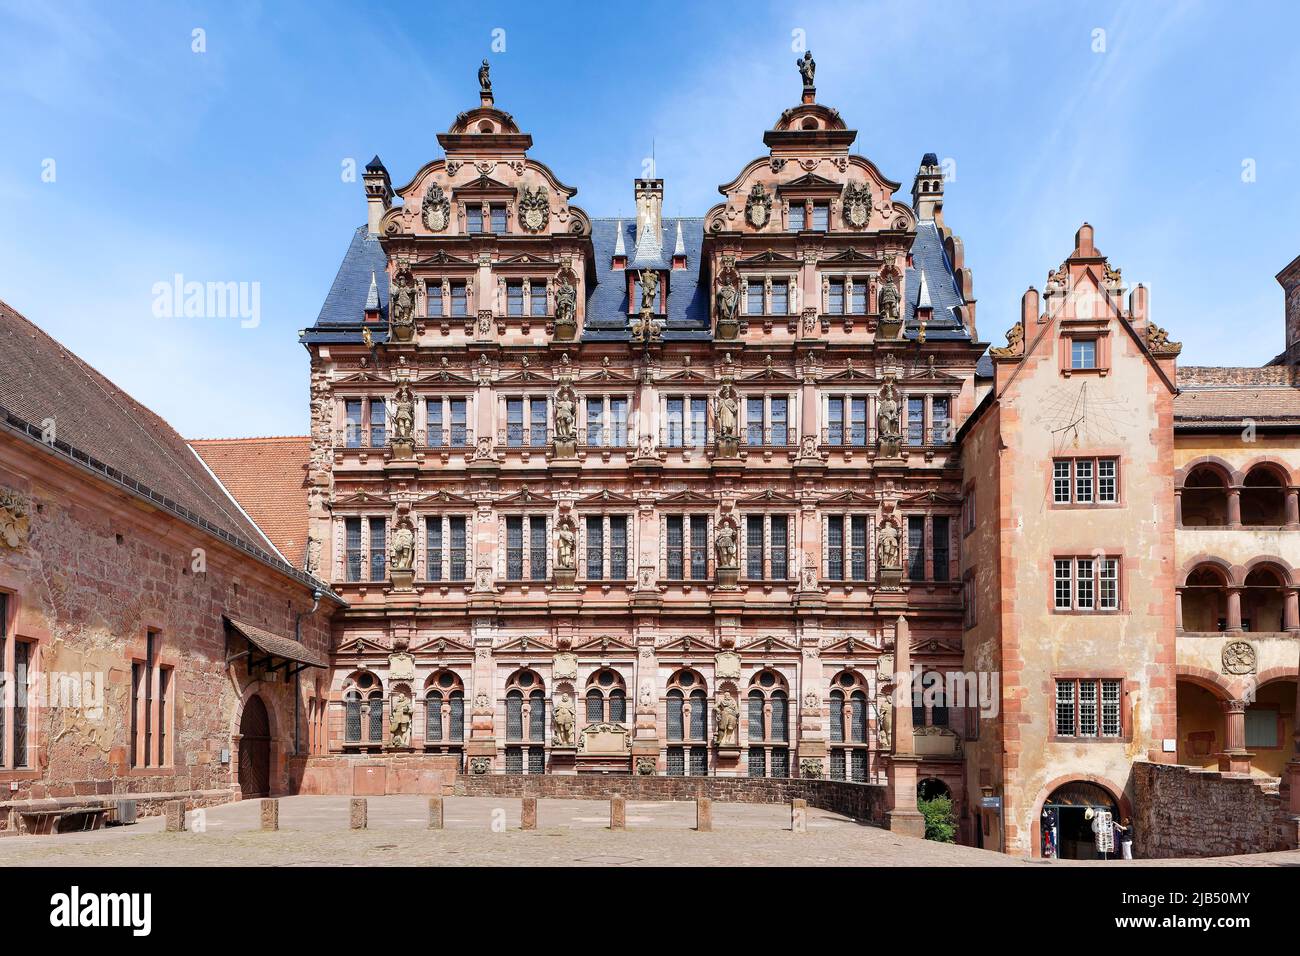 Centre Friedrichsbau in the castle courtyard, built by Elector Friedrich IV. 1601 to 1607, ancestral gallery of the electors in the facade Stock Photo